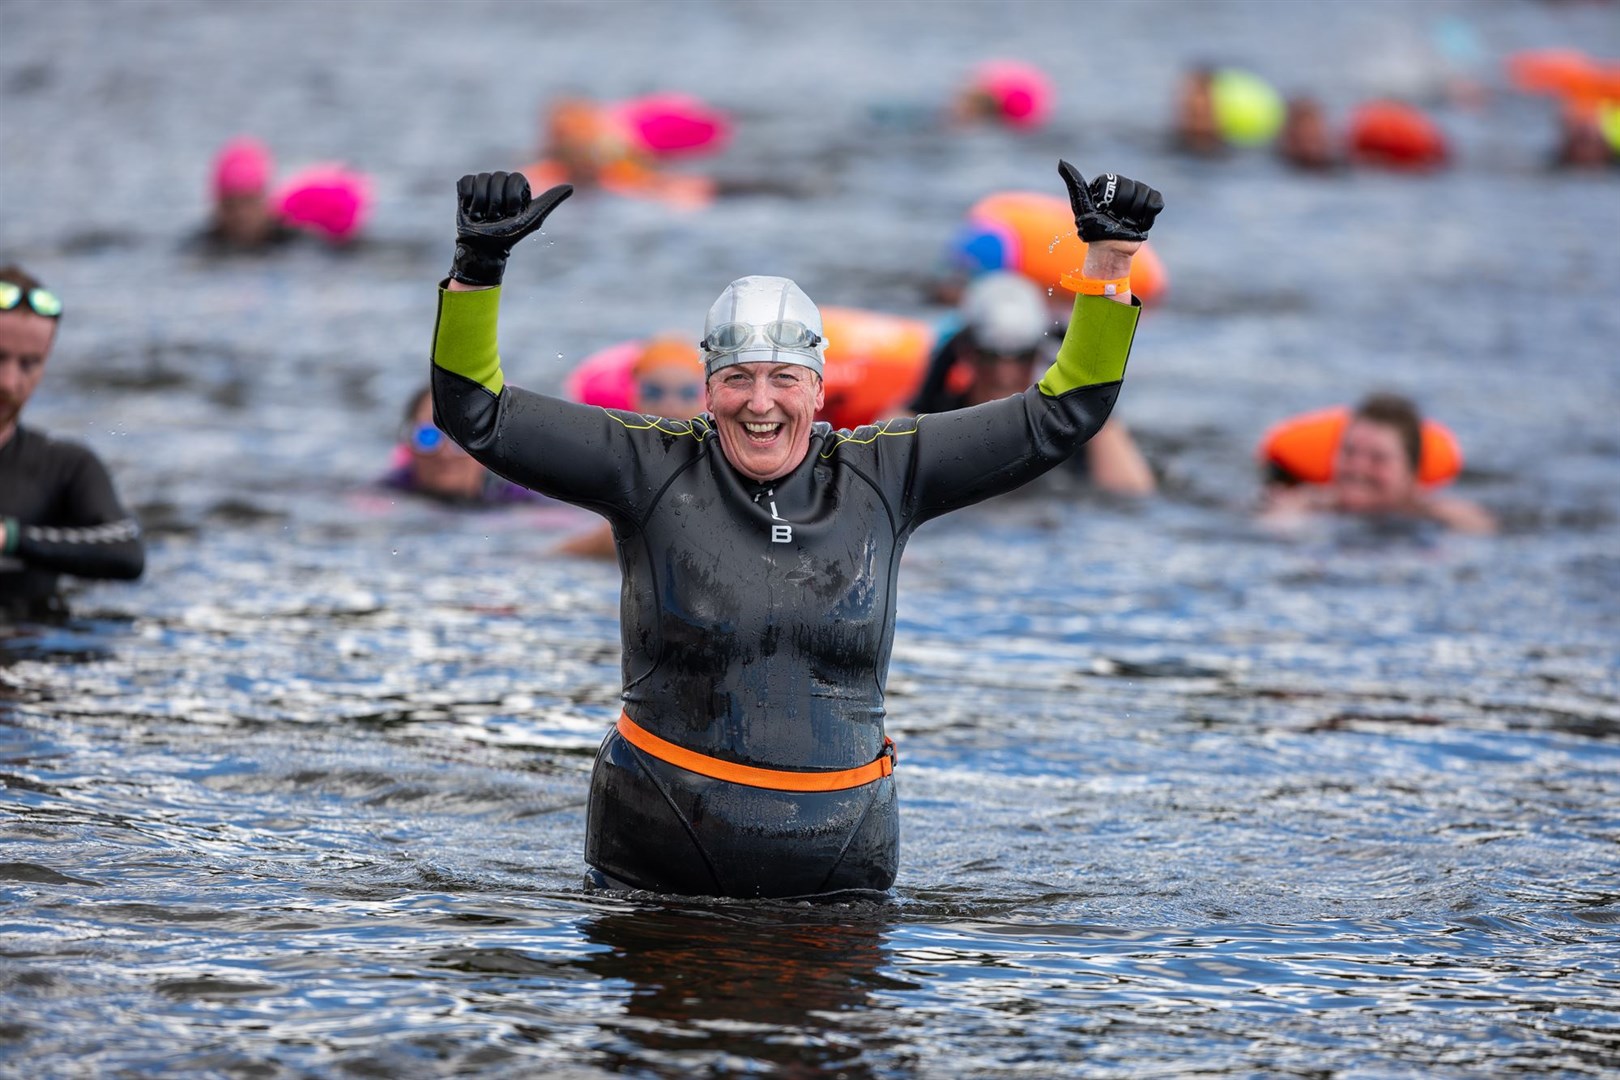 Swimmers take to the chilly waters of Inverness for the Kessock Ferry Swim, returning after a 50 year gap. This classic route from South to North Kessock, and back again is approximately 1200m long and took place in exposed tidal water with an experienced safety support crew in support.